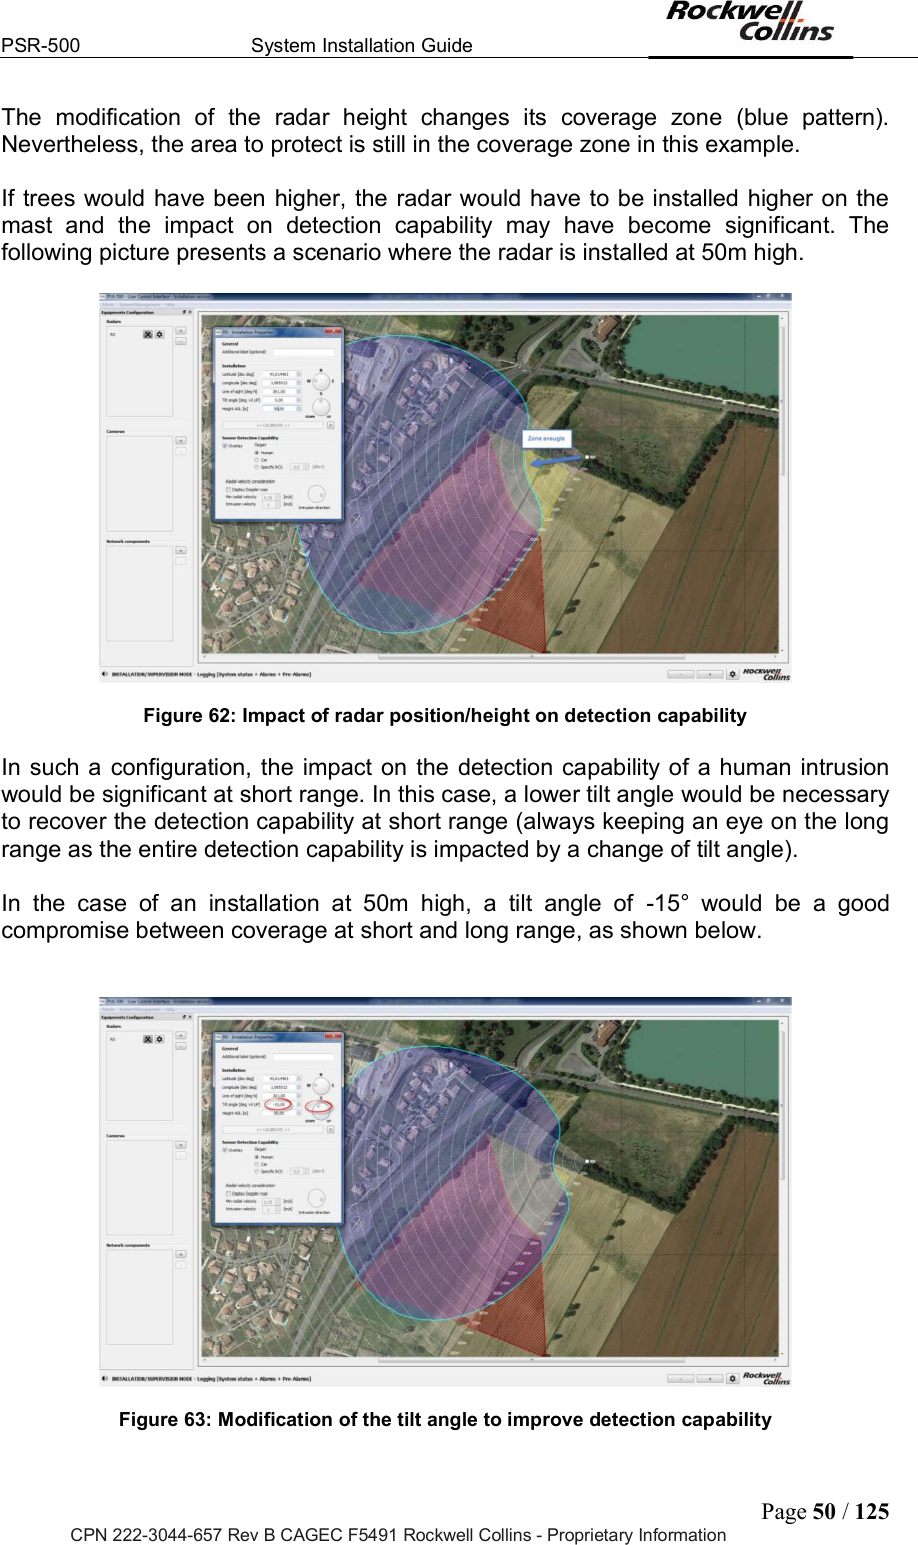 PSR-500  System Installation Guide  Page 50 / 125 CPN 222-3044-657 Rev B CAGEC F5491 Rockwell Collins - Proprietary Information The  modification  of  the  radar  height  changes  its  coverage  zone  (blue  pattern). Nevertheless, the area to protect is still in the coverage zone in this example.   If trees would have been higher, the radar would have to be installed higher on the mast  and  the  impact  on  detection  capability  may  have  become  significant.  The following picture presents a scenario where the radar is installed at 50m high.     Figure 62: Impact of radar position/height on detection capability  In such a  configuration, the  impact on  the detection capability of a human intrusion would be significant at short range. In this case, a lower tilt angle would be necessary to recover the detection capability at short range (always keeping an eye on the long range as the entire detection capability is impacted by a change of tilt angle).   In  the  case  of  an  installation  at  50m  high,  a  tilt  angle  of  -15°  would  be  a  good compromise between coverage at short and long range, as shown below.      Figure 63: Modification of the tilt angle to improve detection capability  